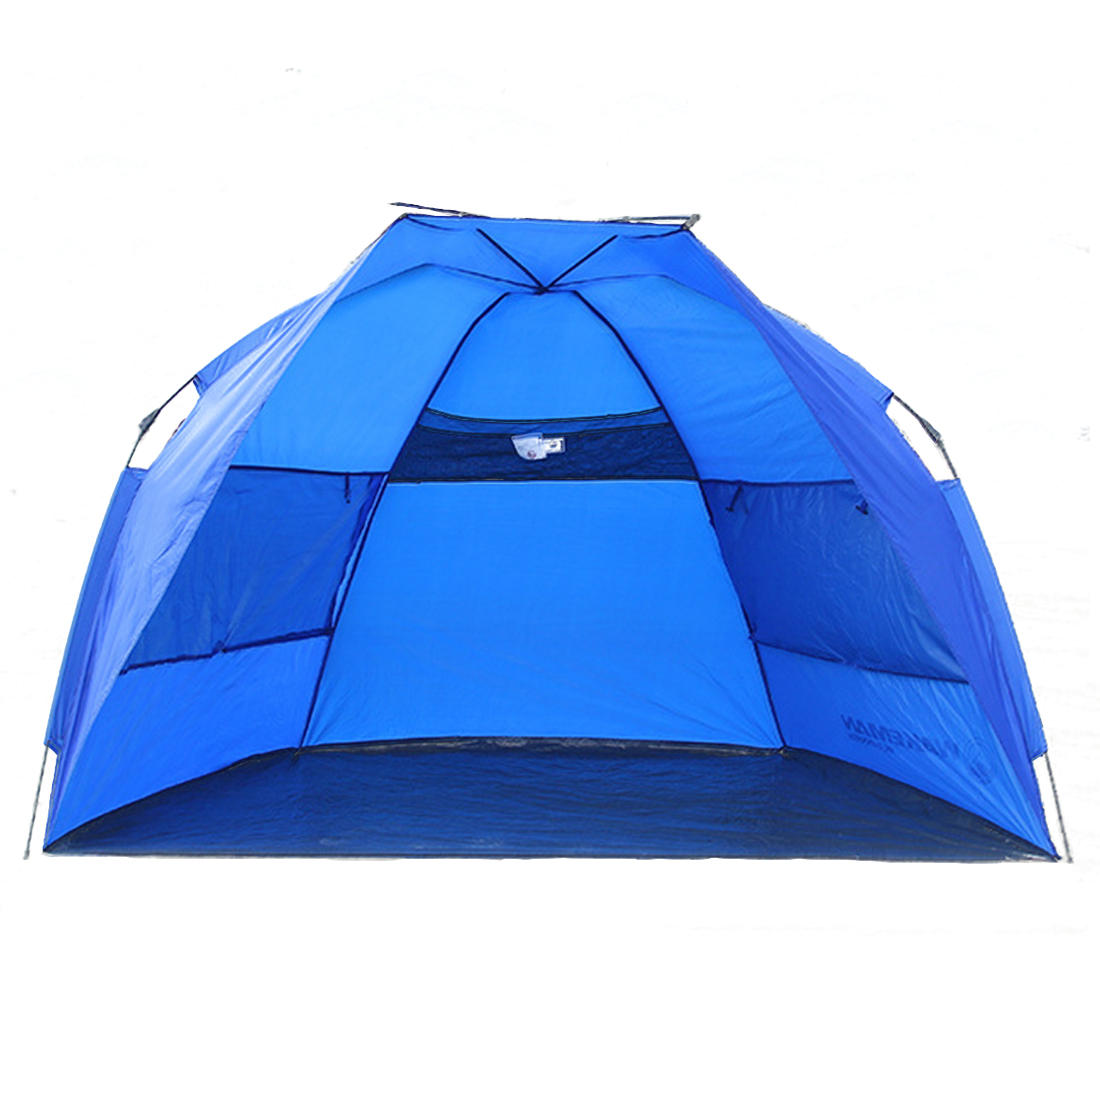 1-2 People Outdoor Camping Tent Waterprood Automatic Beach Sunshade Shelter Canopy